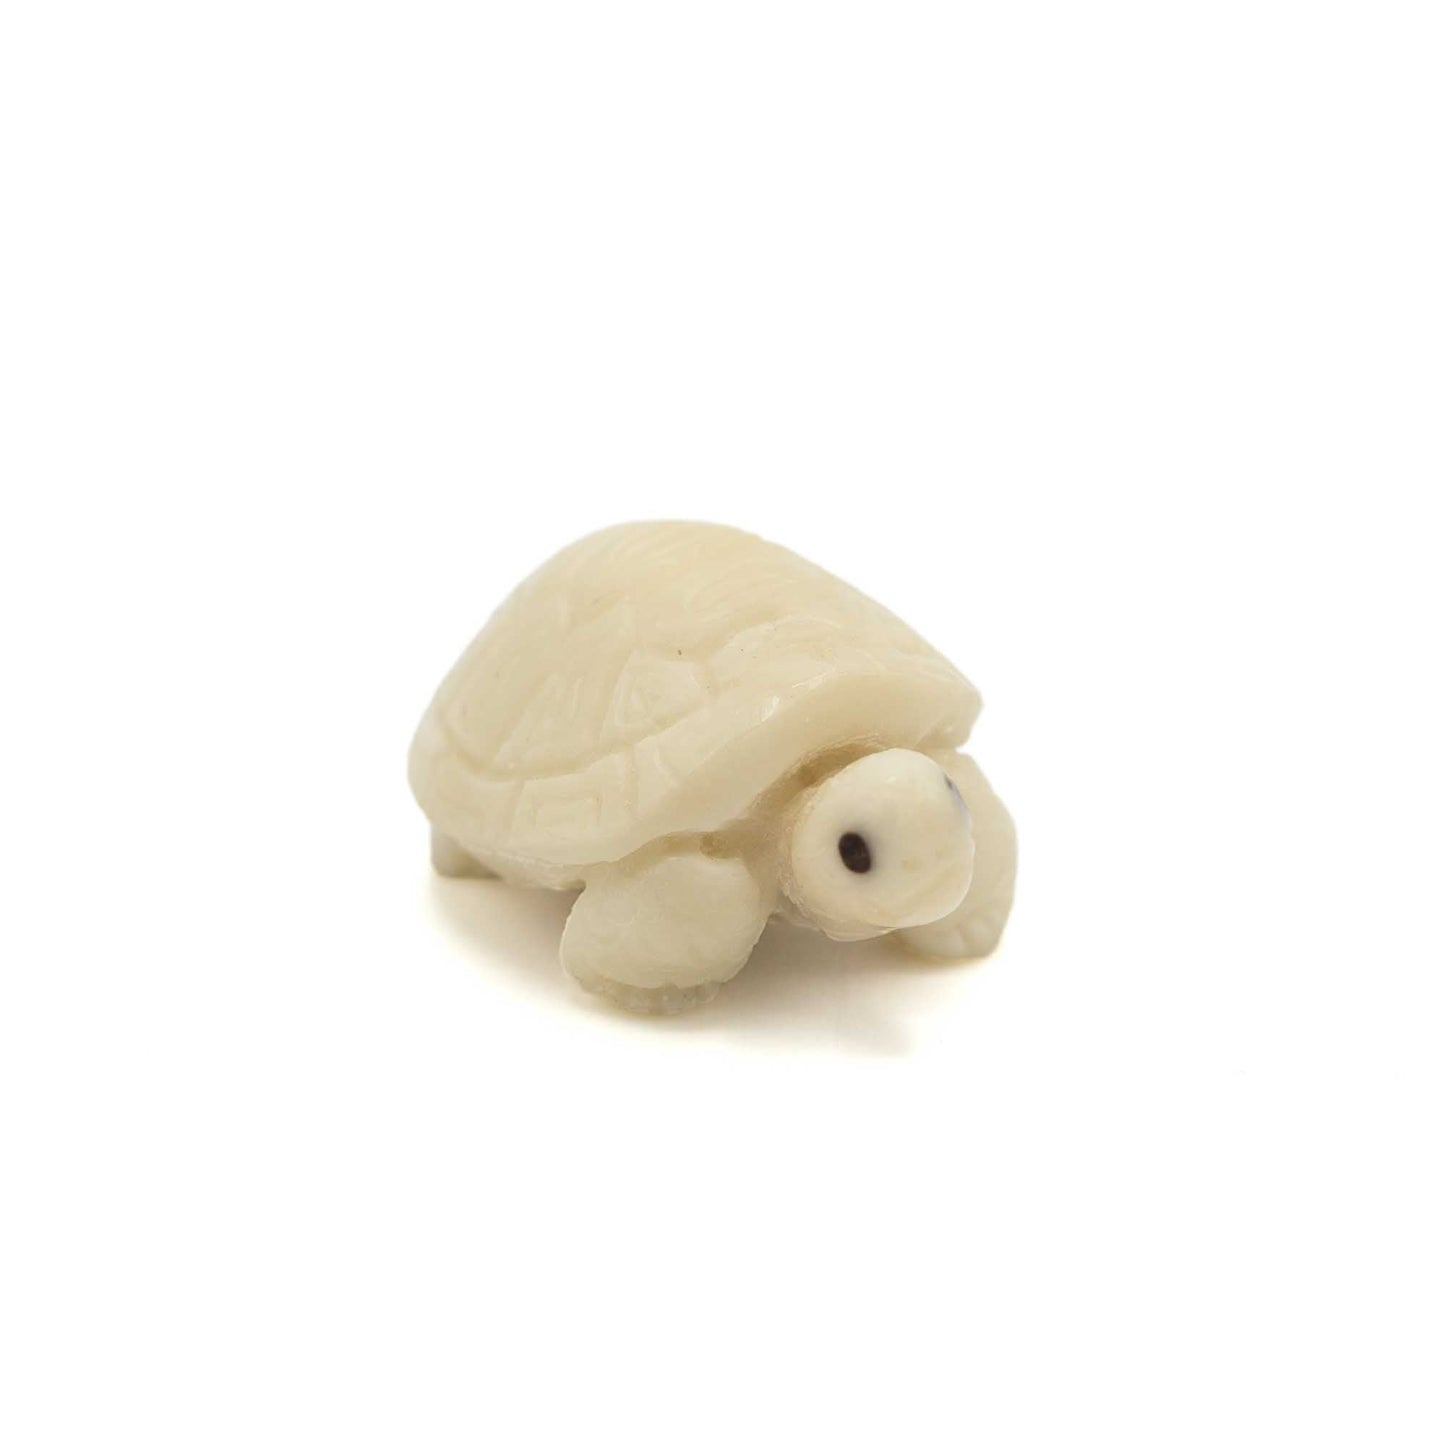 Tagua tortoise seen from the front, slightly right side view.